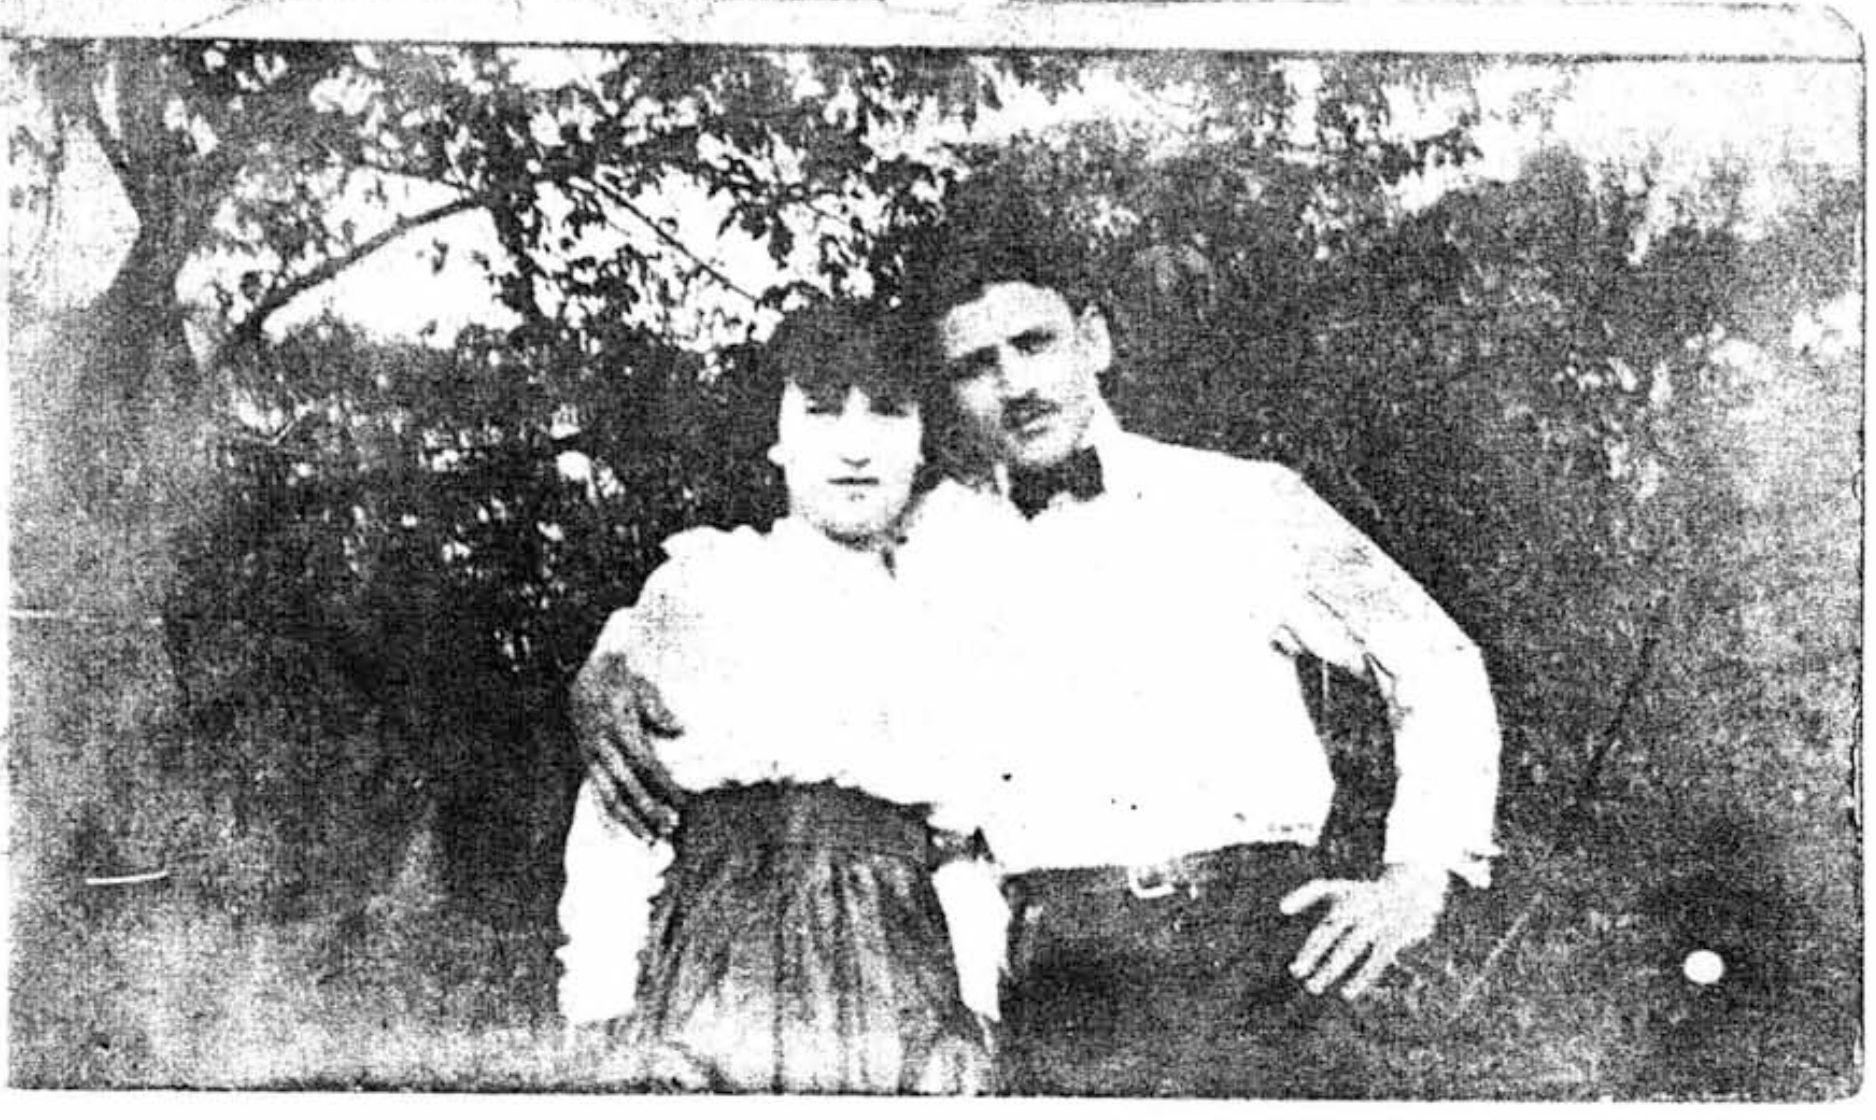 A young mustachioed dark-haired man in a black bowtie and white shirt, with his right arm around a young woman with white blouse and high-waisted skirt pose outdoors against a leafy background in this photo from 1917.